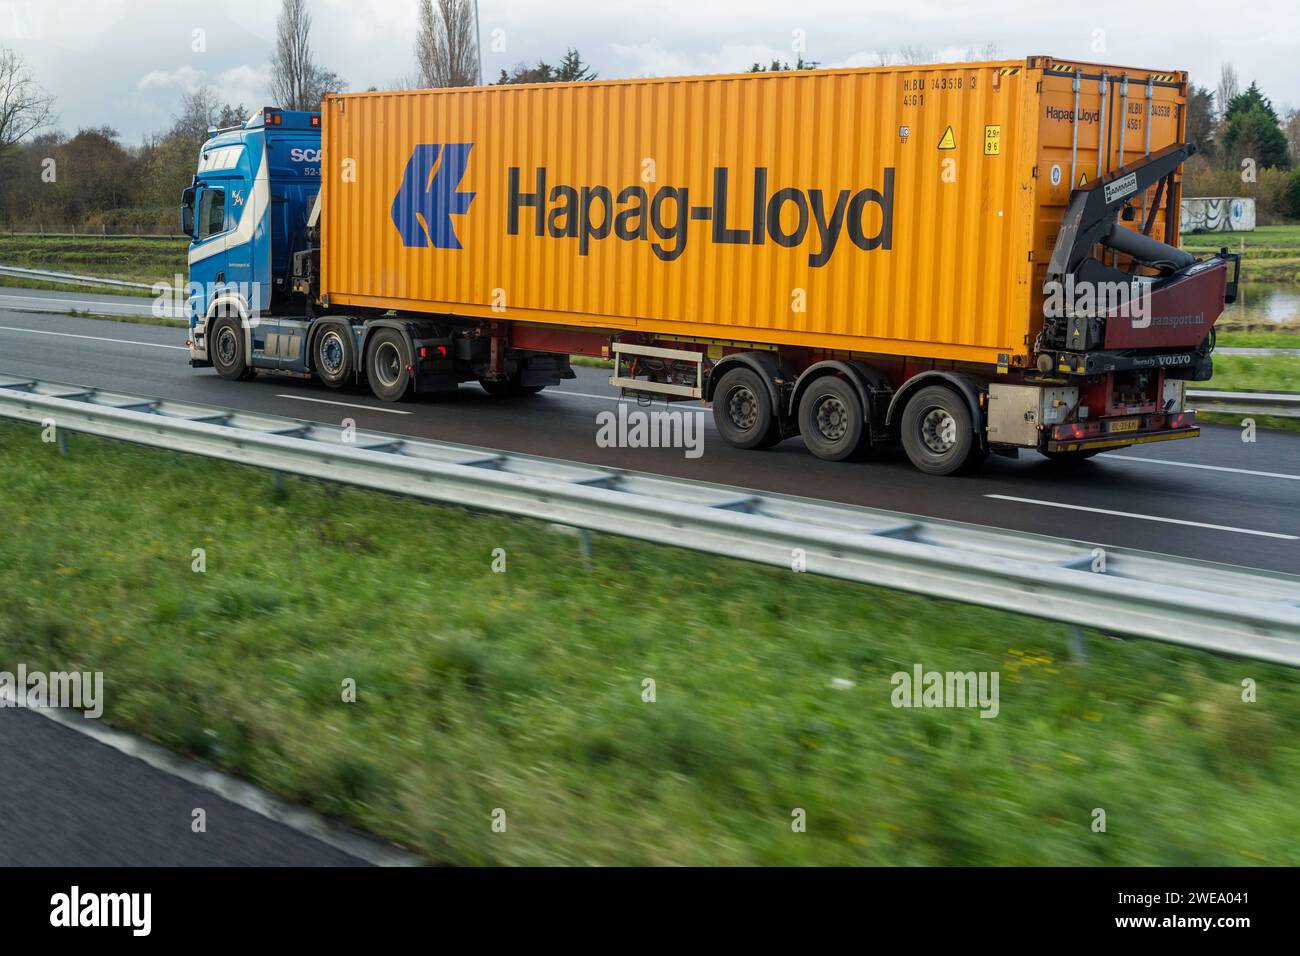 Amsterdam, Netherlands - December 7, 2022: A truck on the highway with a Hapag-Lloyd container *** Ein LKW auf der Autobahn mit einem Hapag-Lloyd Container Stock Photo